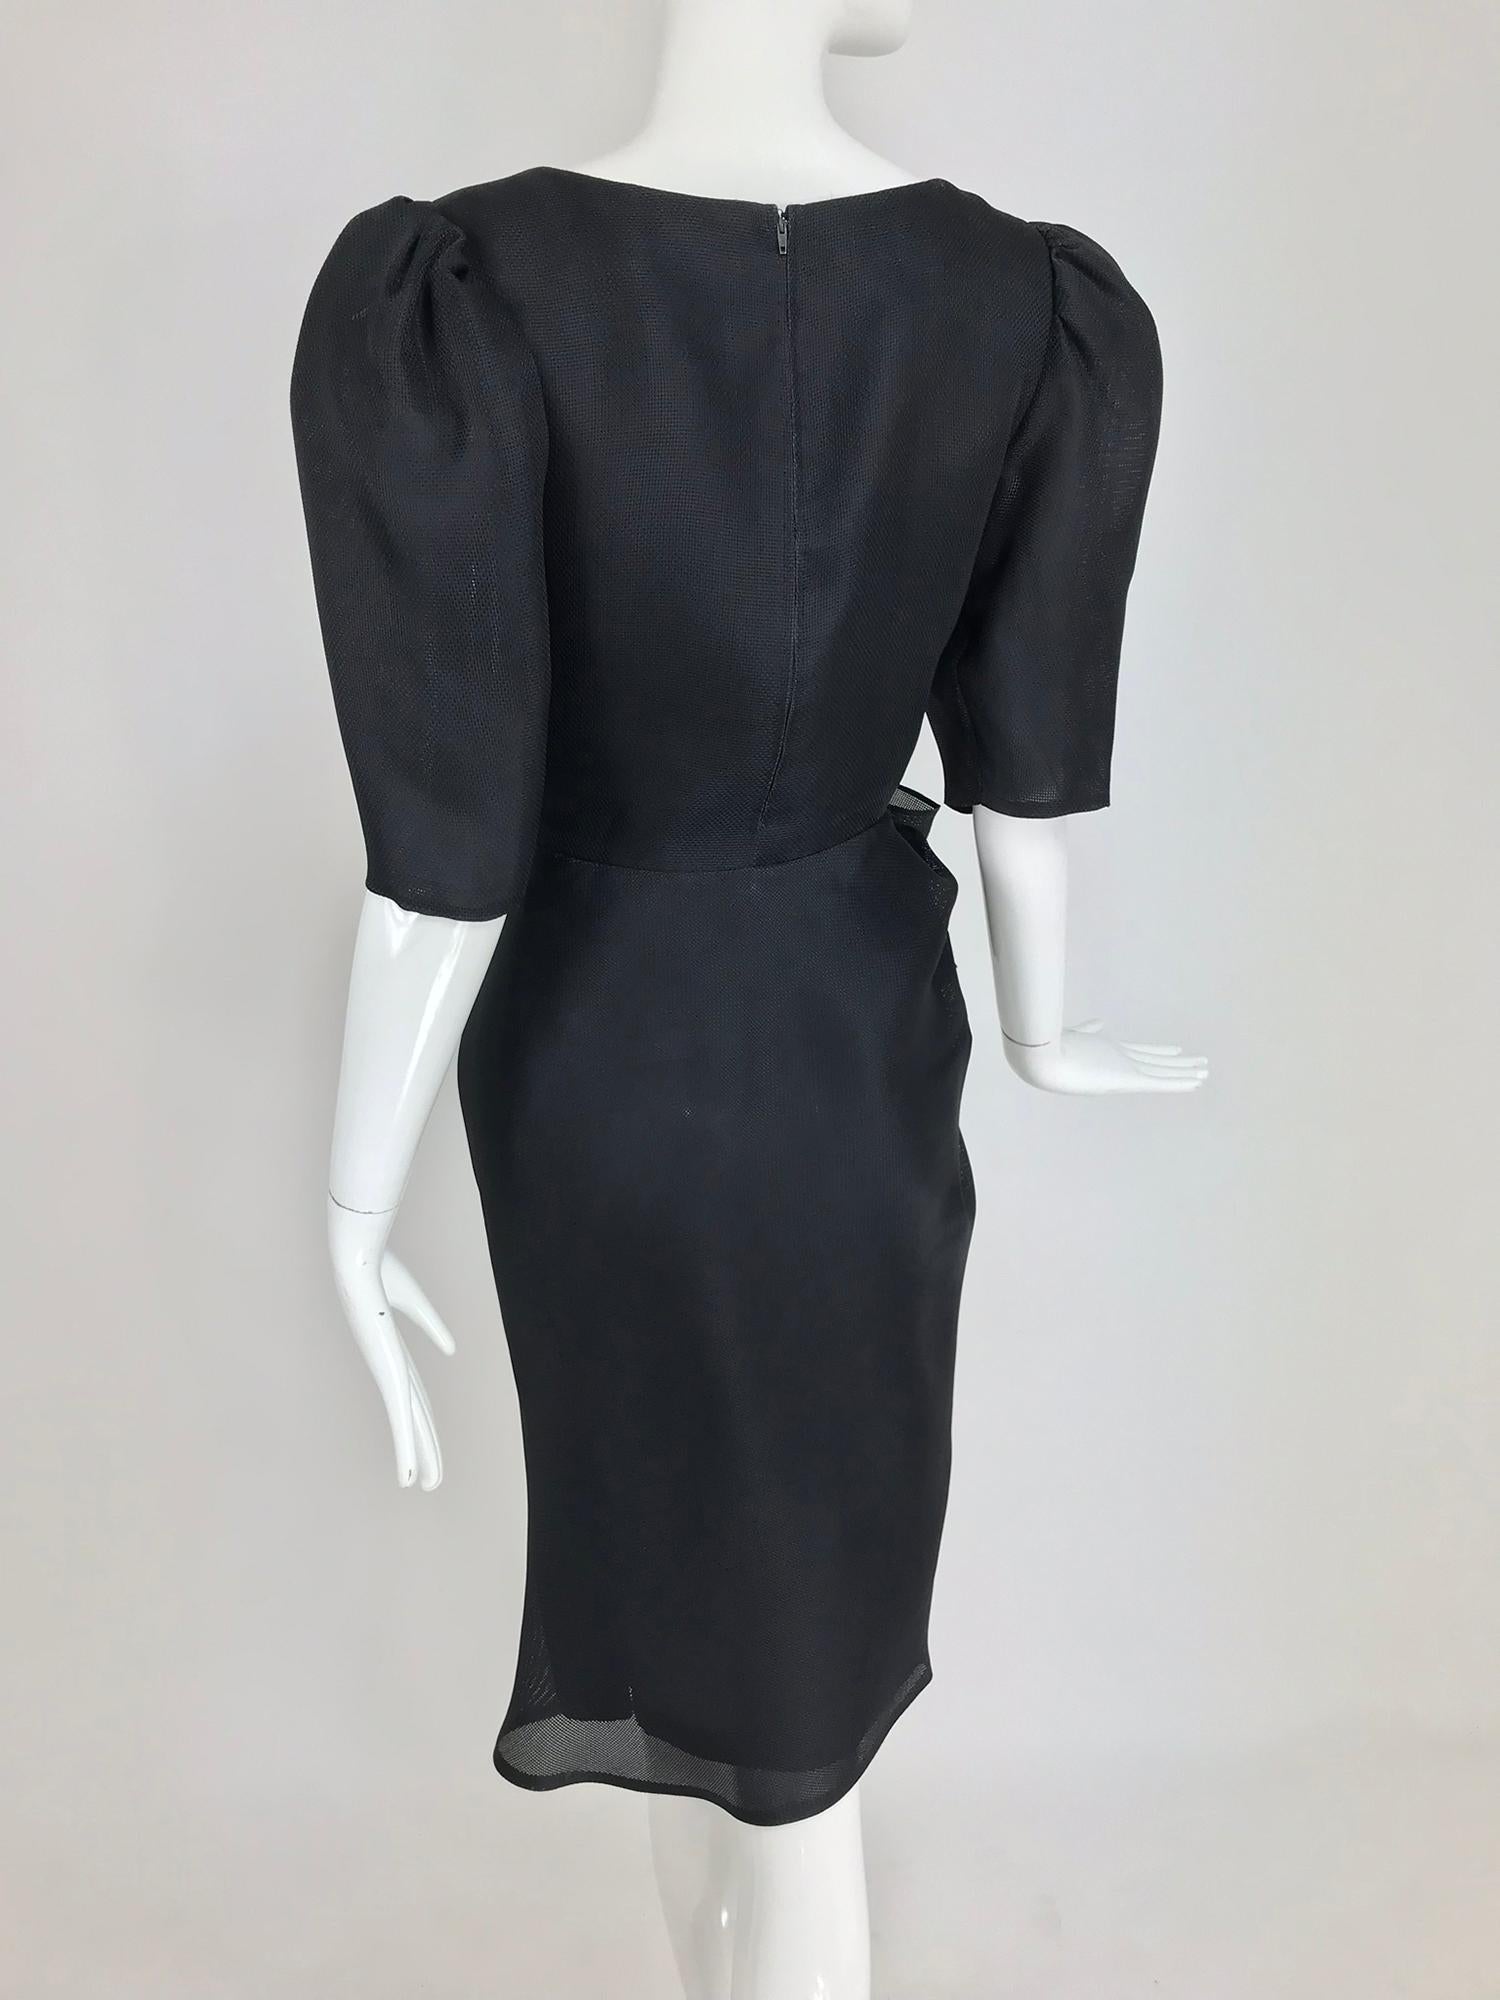 Givency Black Textured Silk Dress with Hip Bow 1990s For Sale 5